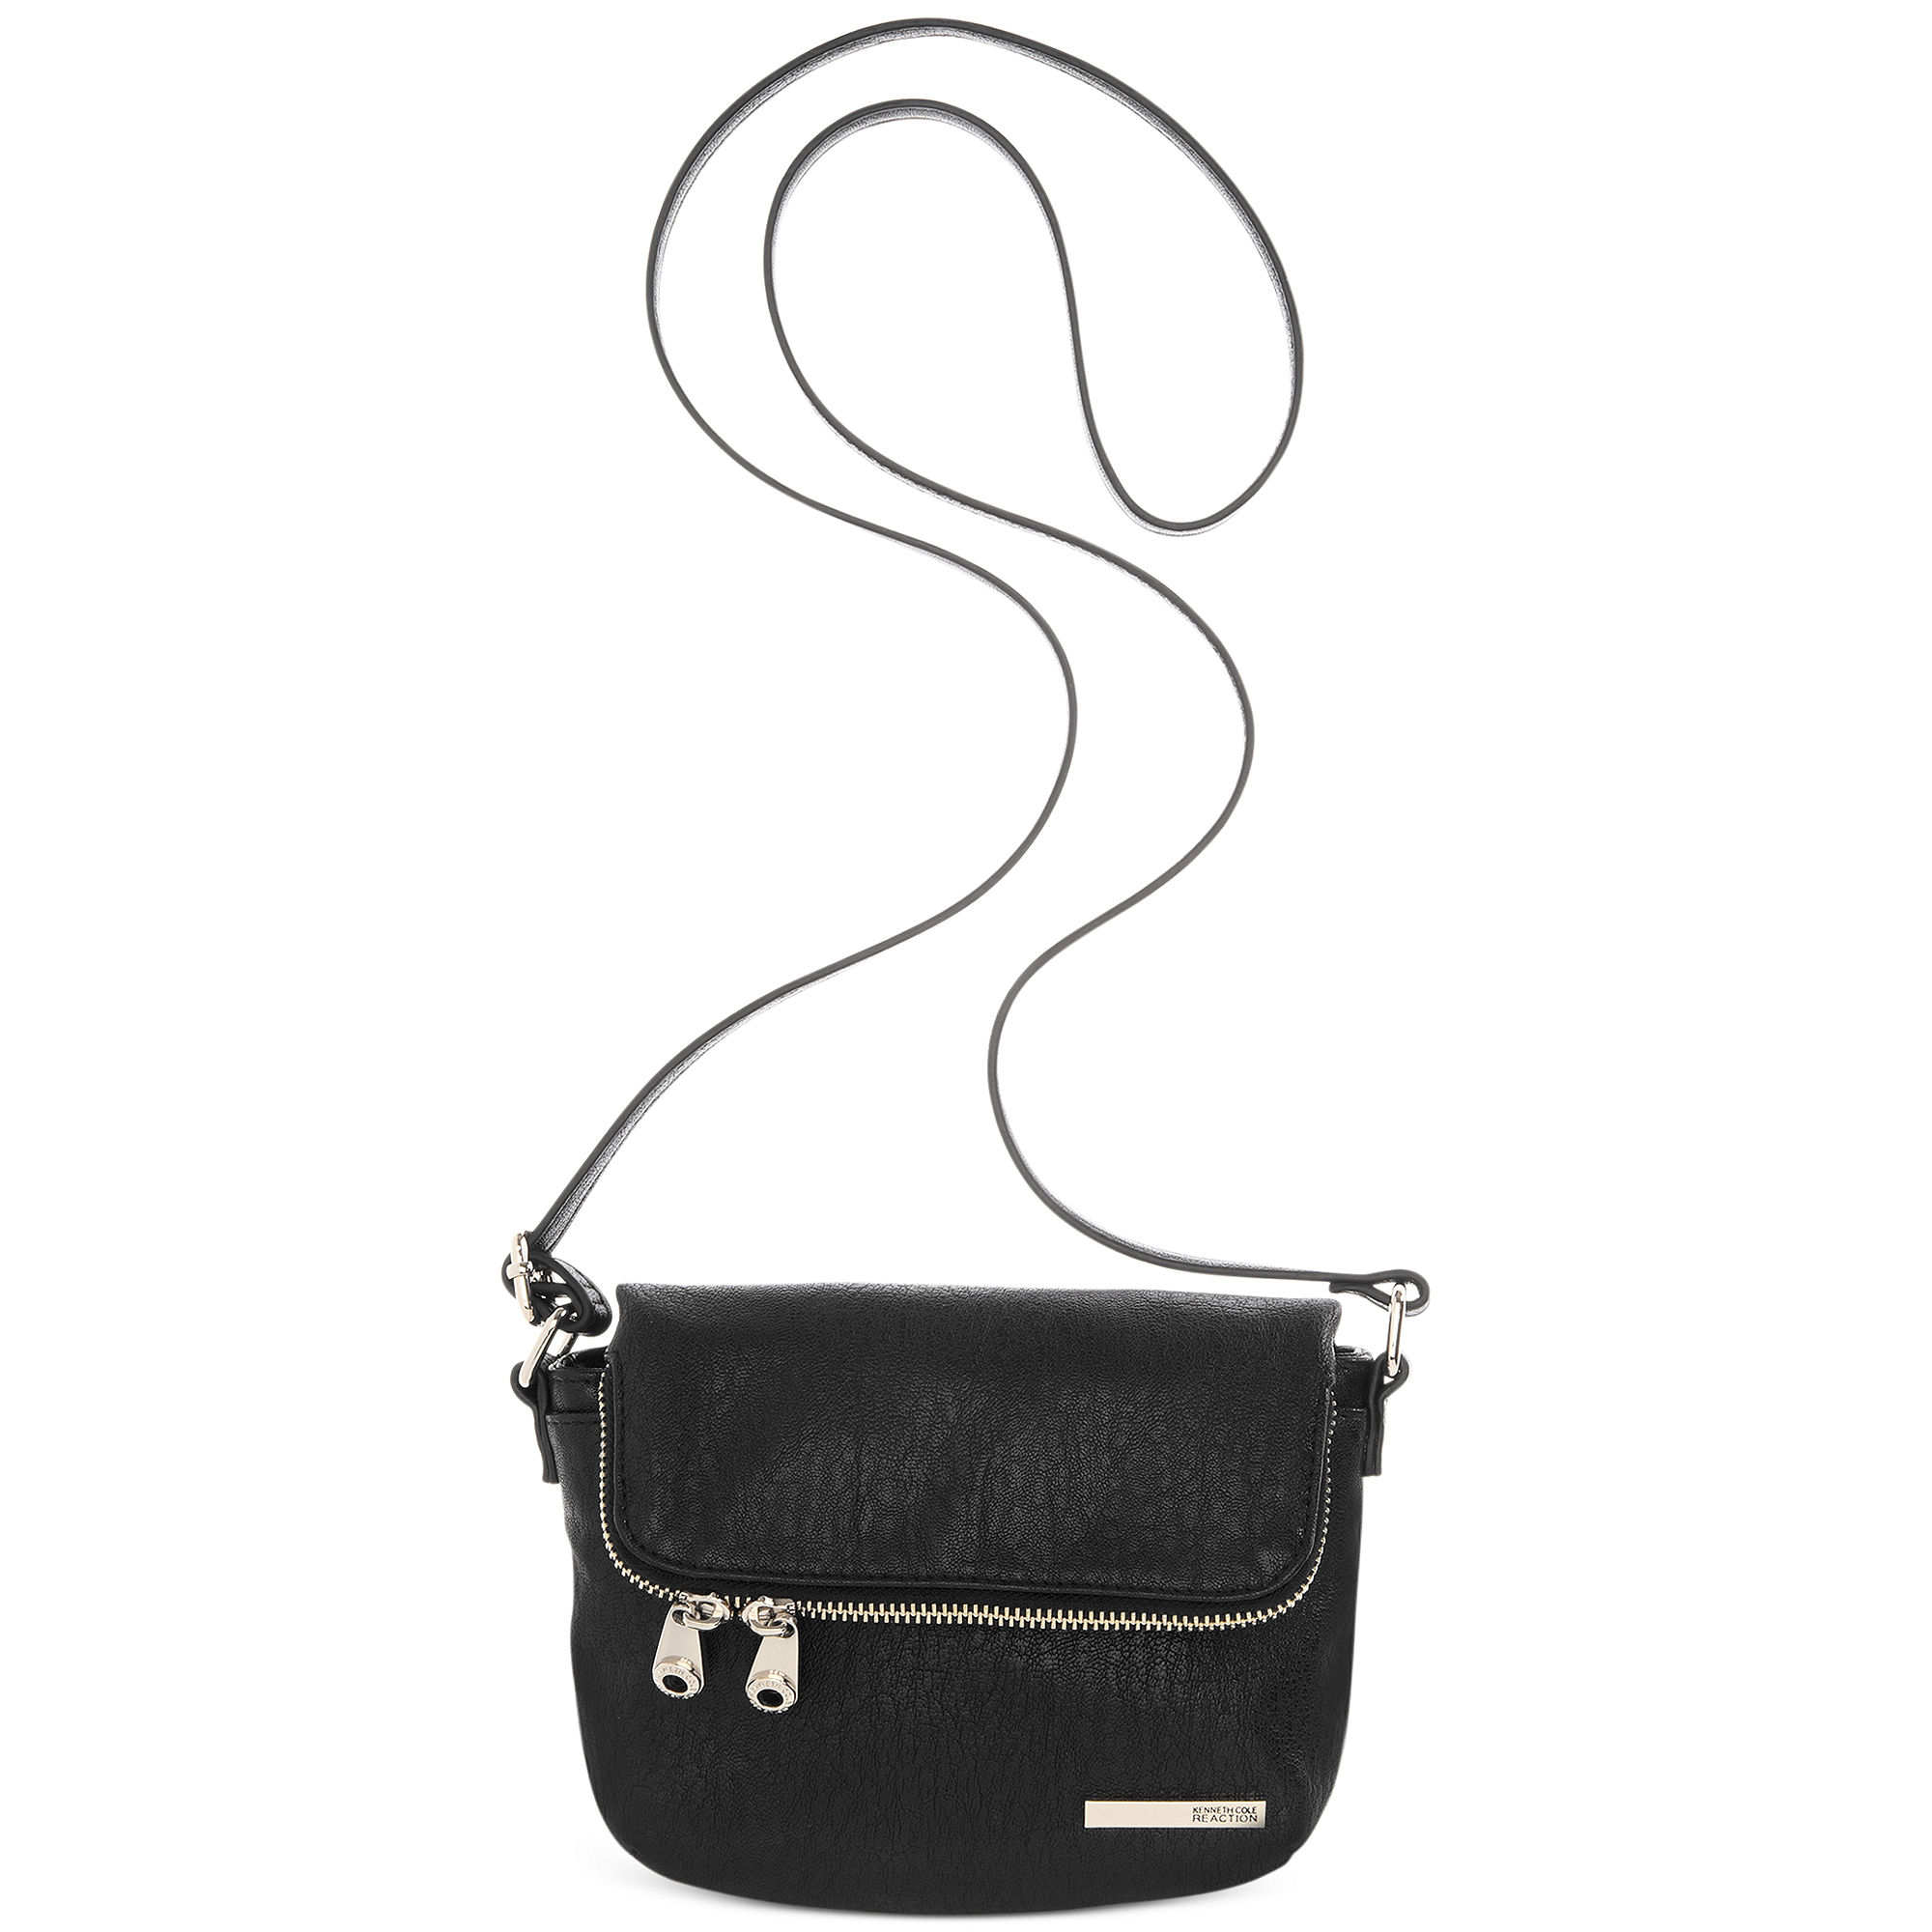 Kenneth Cole Reaction Wooster Street Foldover Flap Mini Bag in Black | Lyst